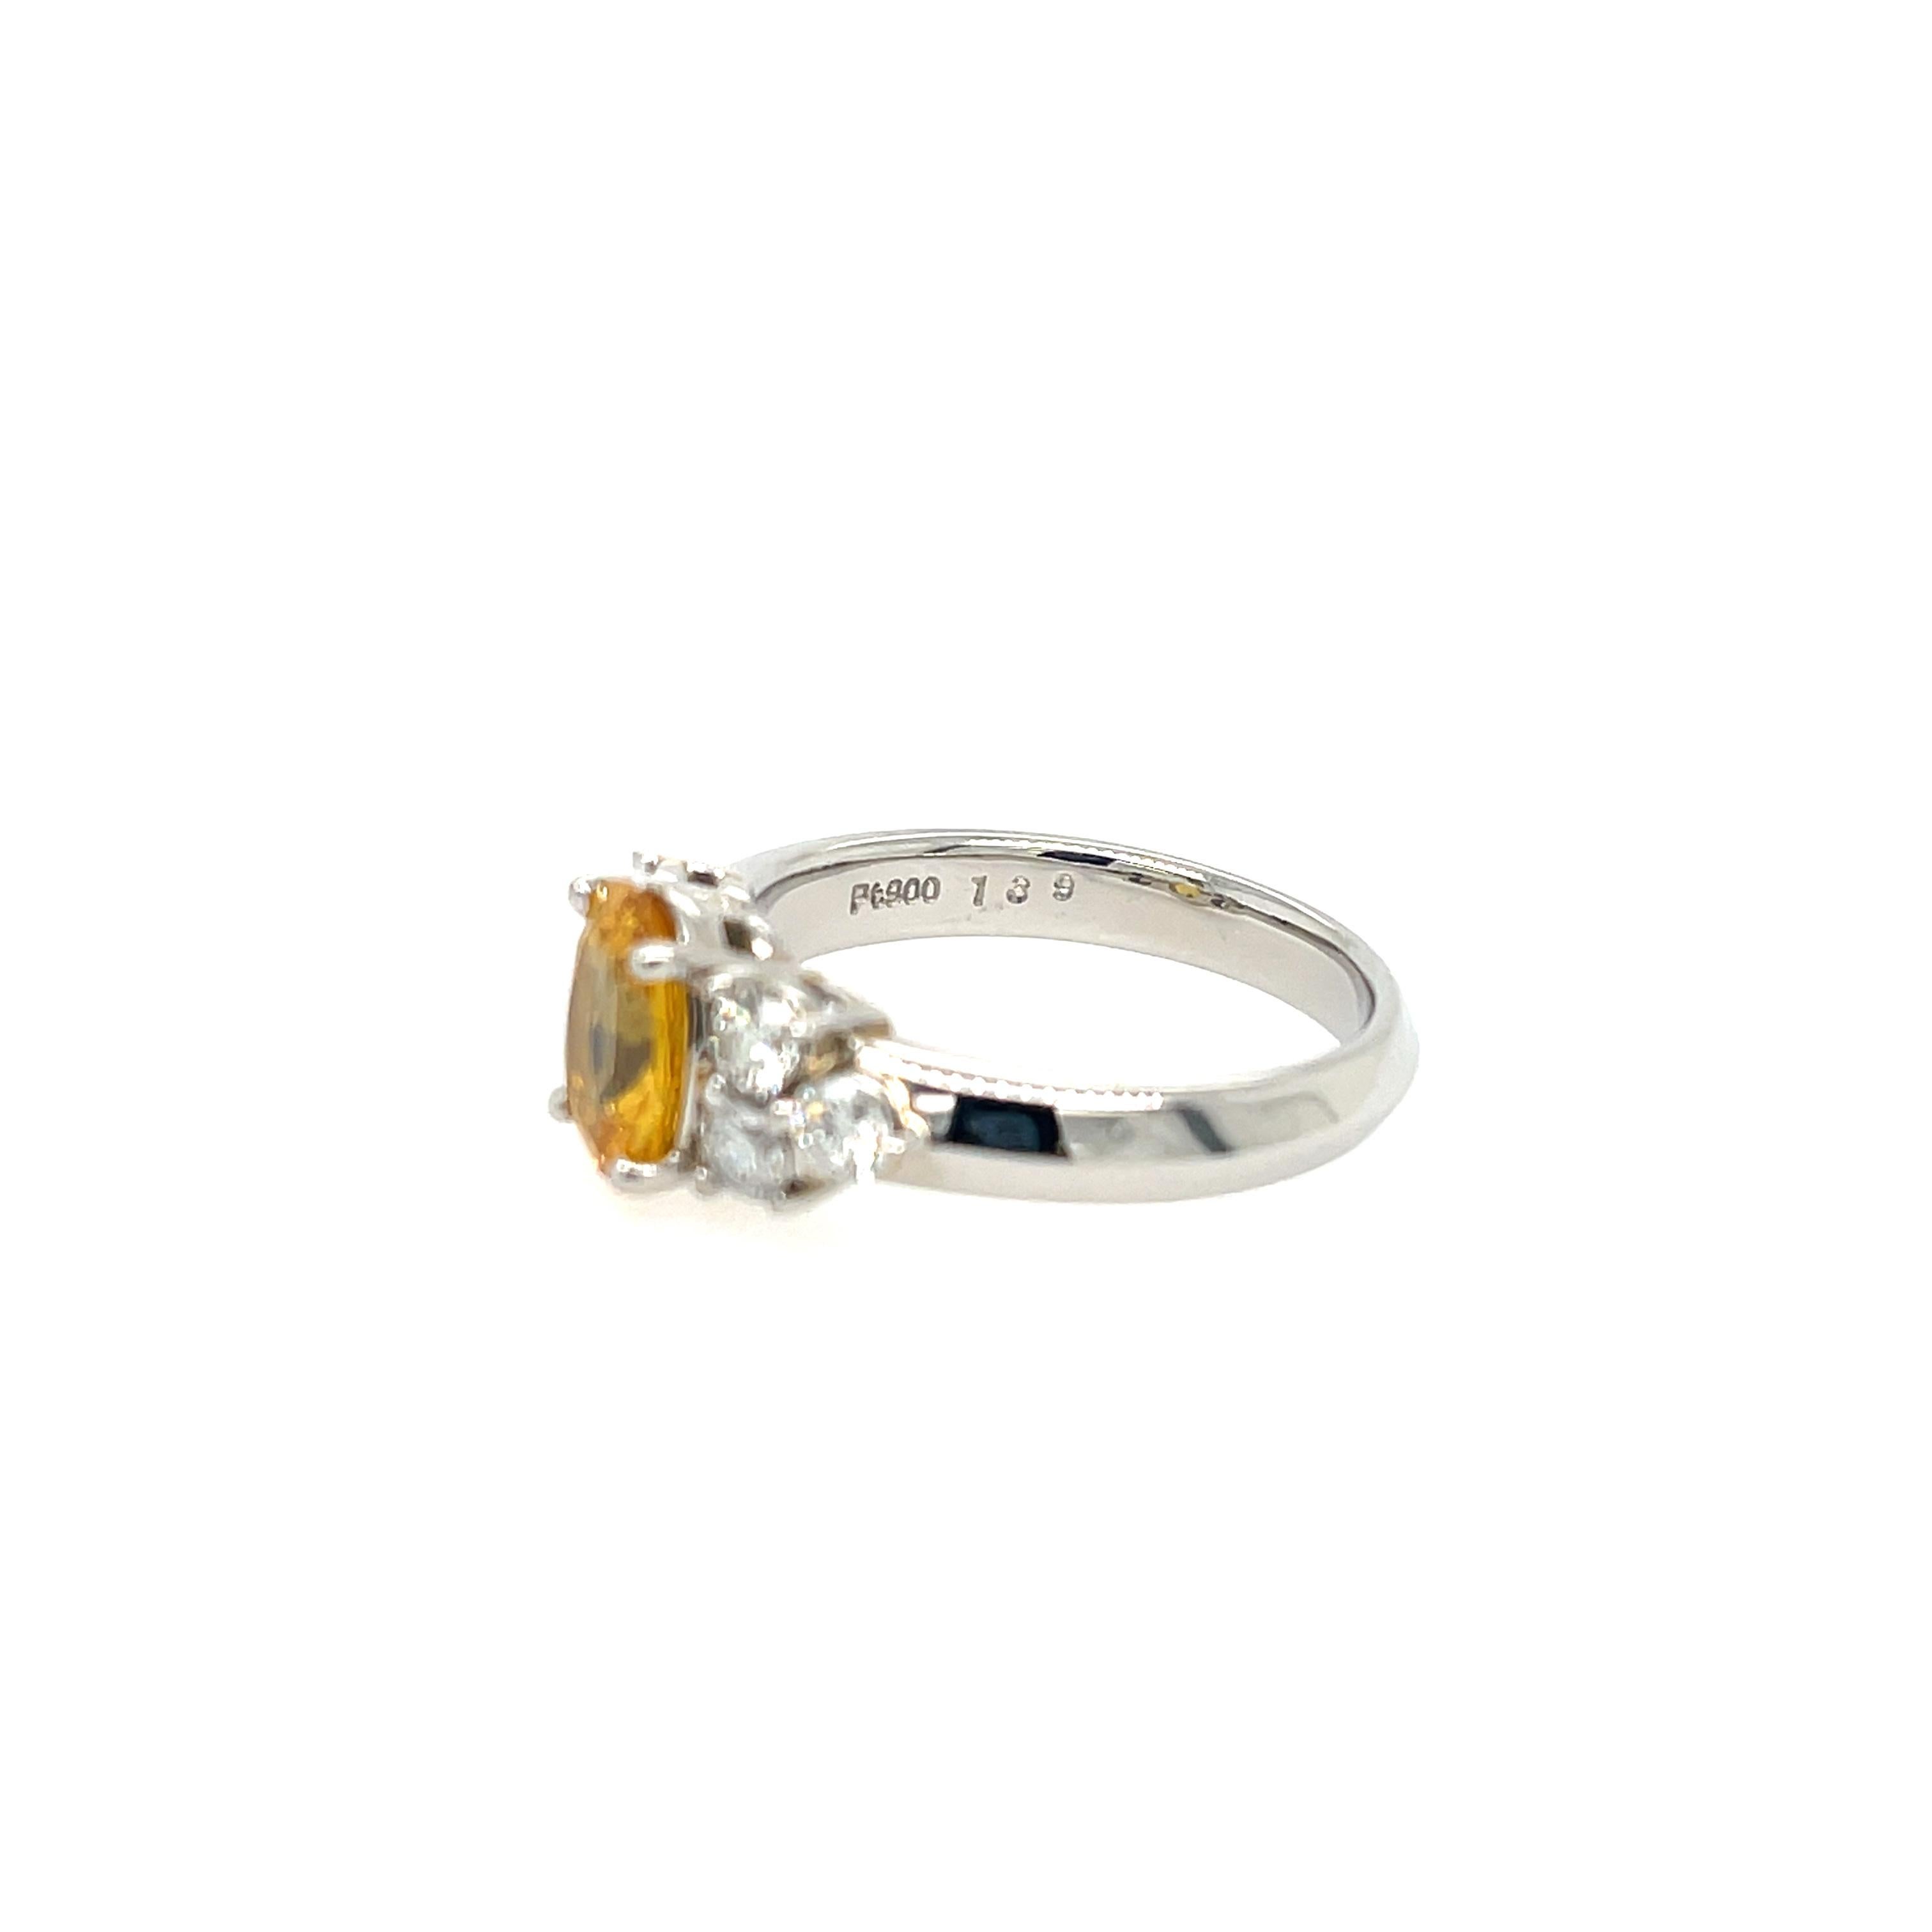 Estate Yellow Sapphire and Diamond Ring in Platinum. The ring features a 1.39ct oval yellow sapphire and 0.55ctw of round diamonds. Size 6.